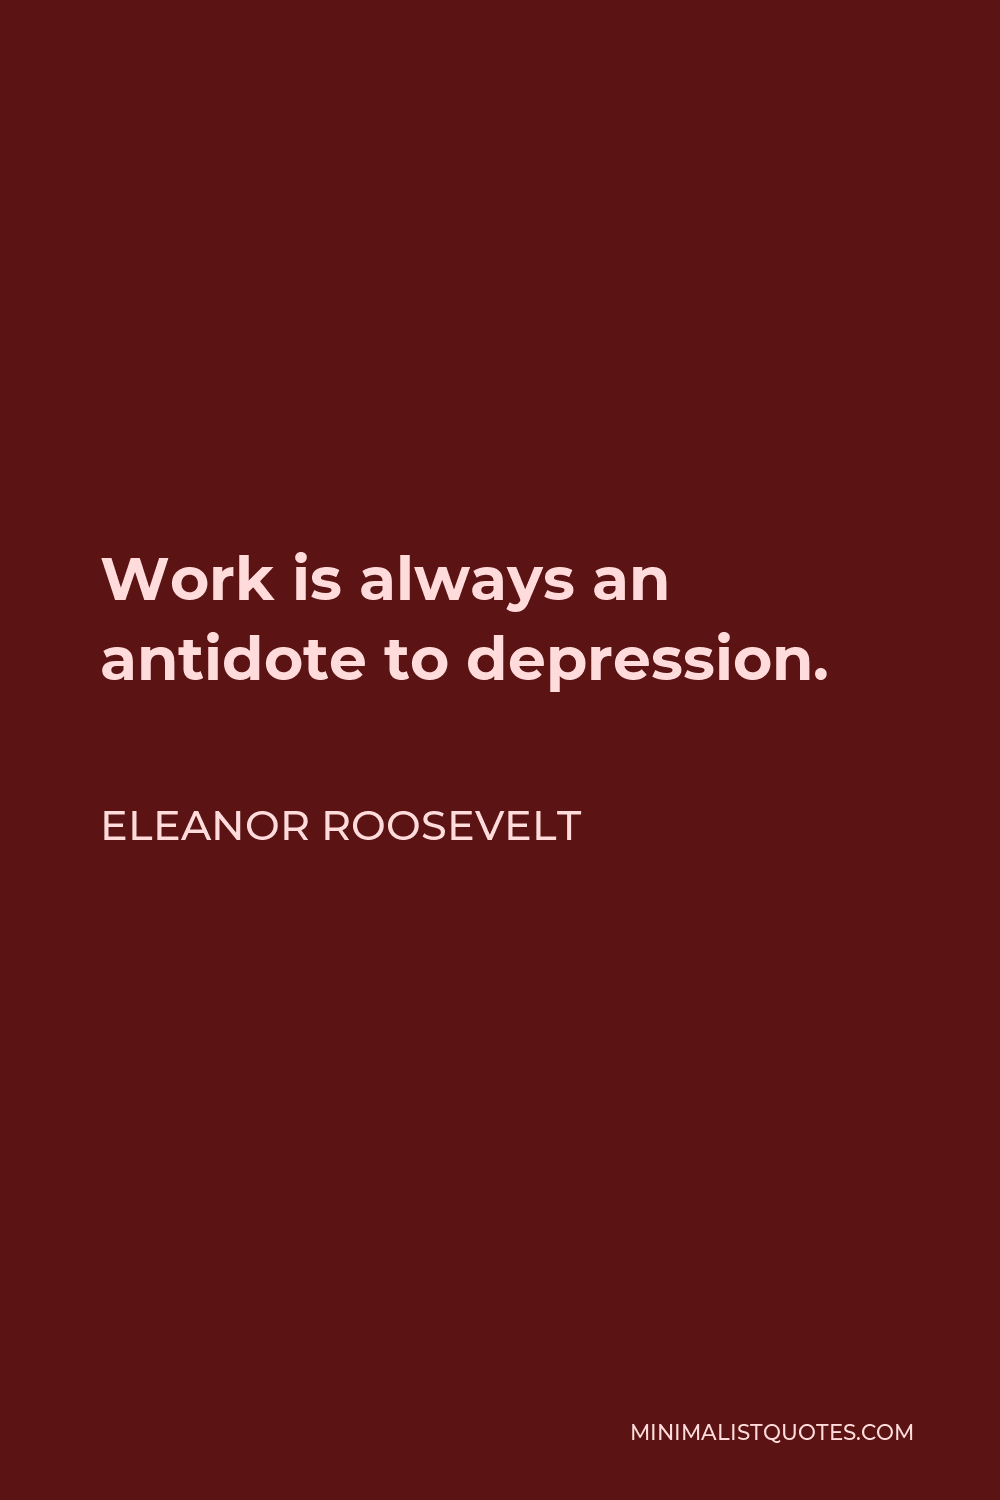 Eleanor Roosevelt Quote - Work is always an antidote to depression.